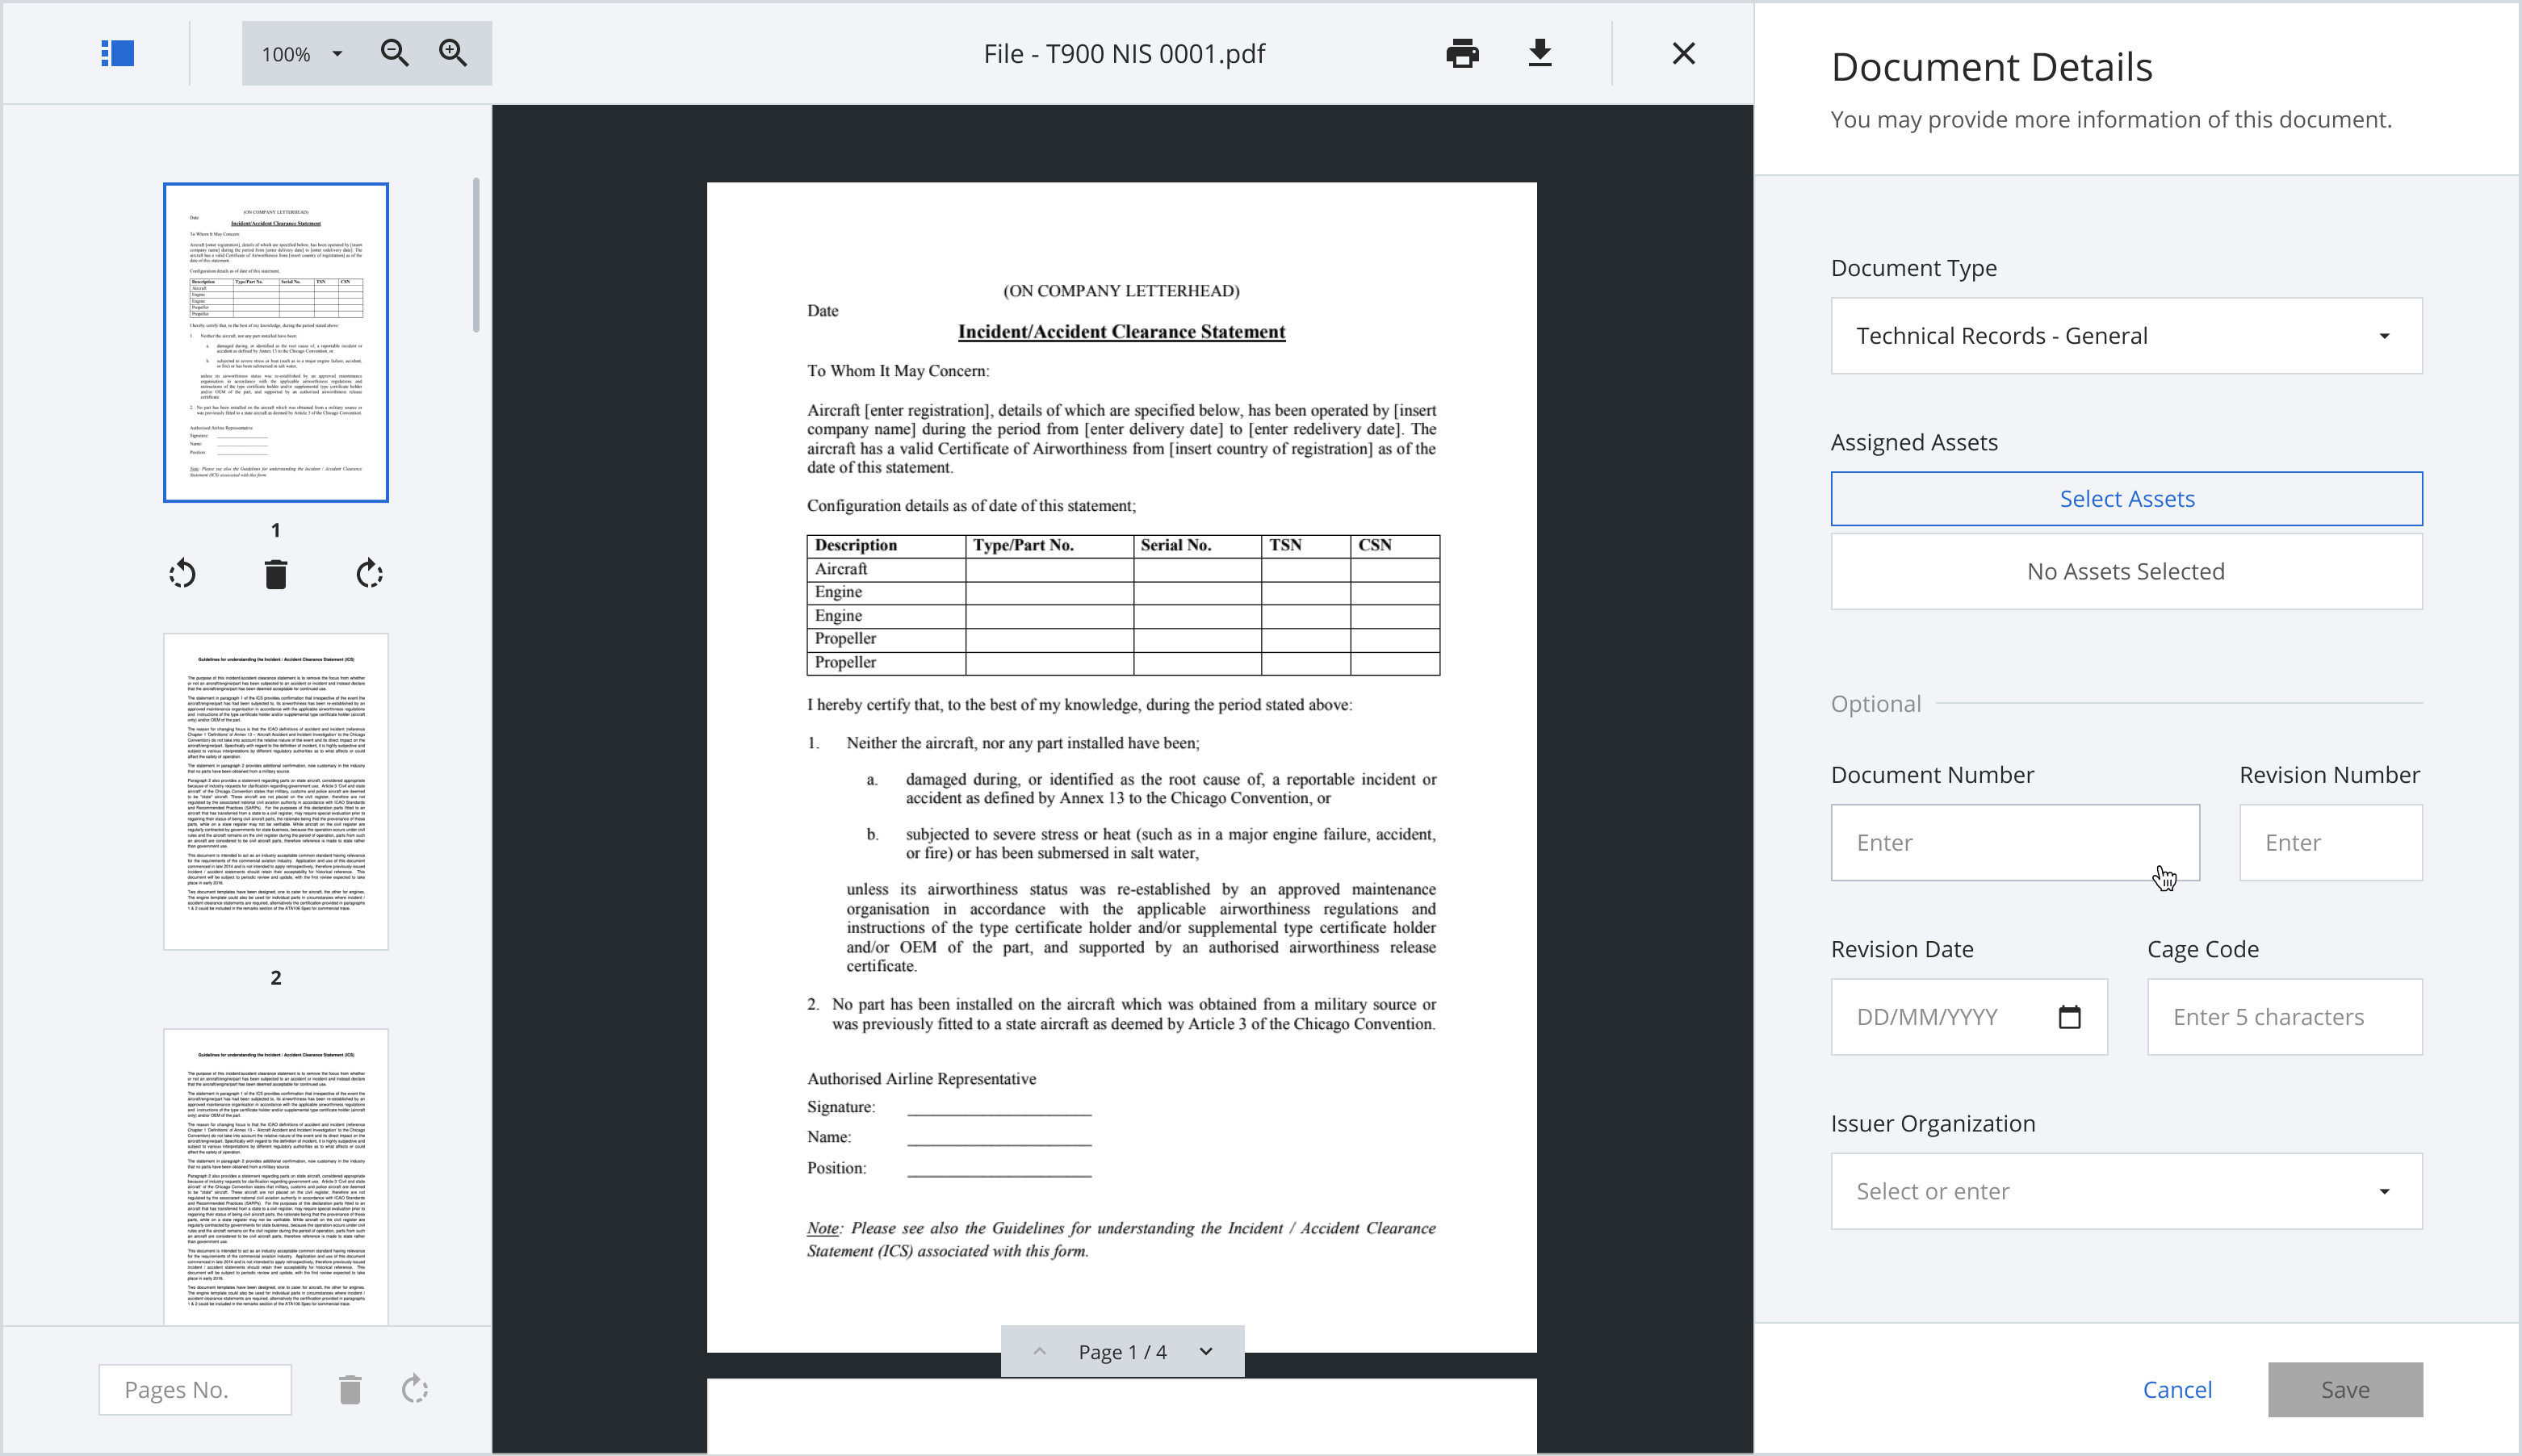 Fill in document details